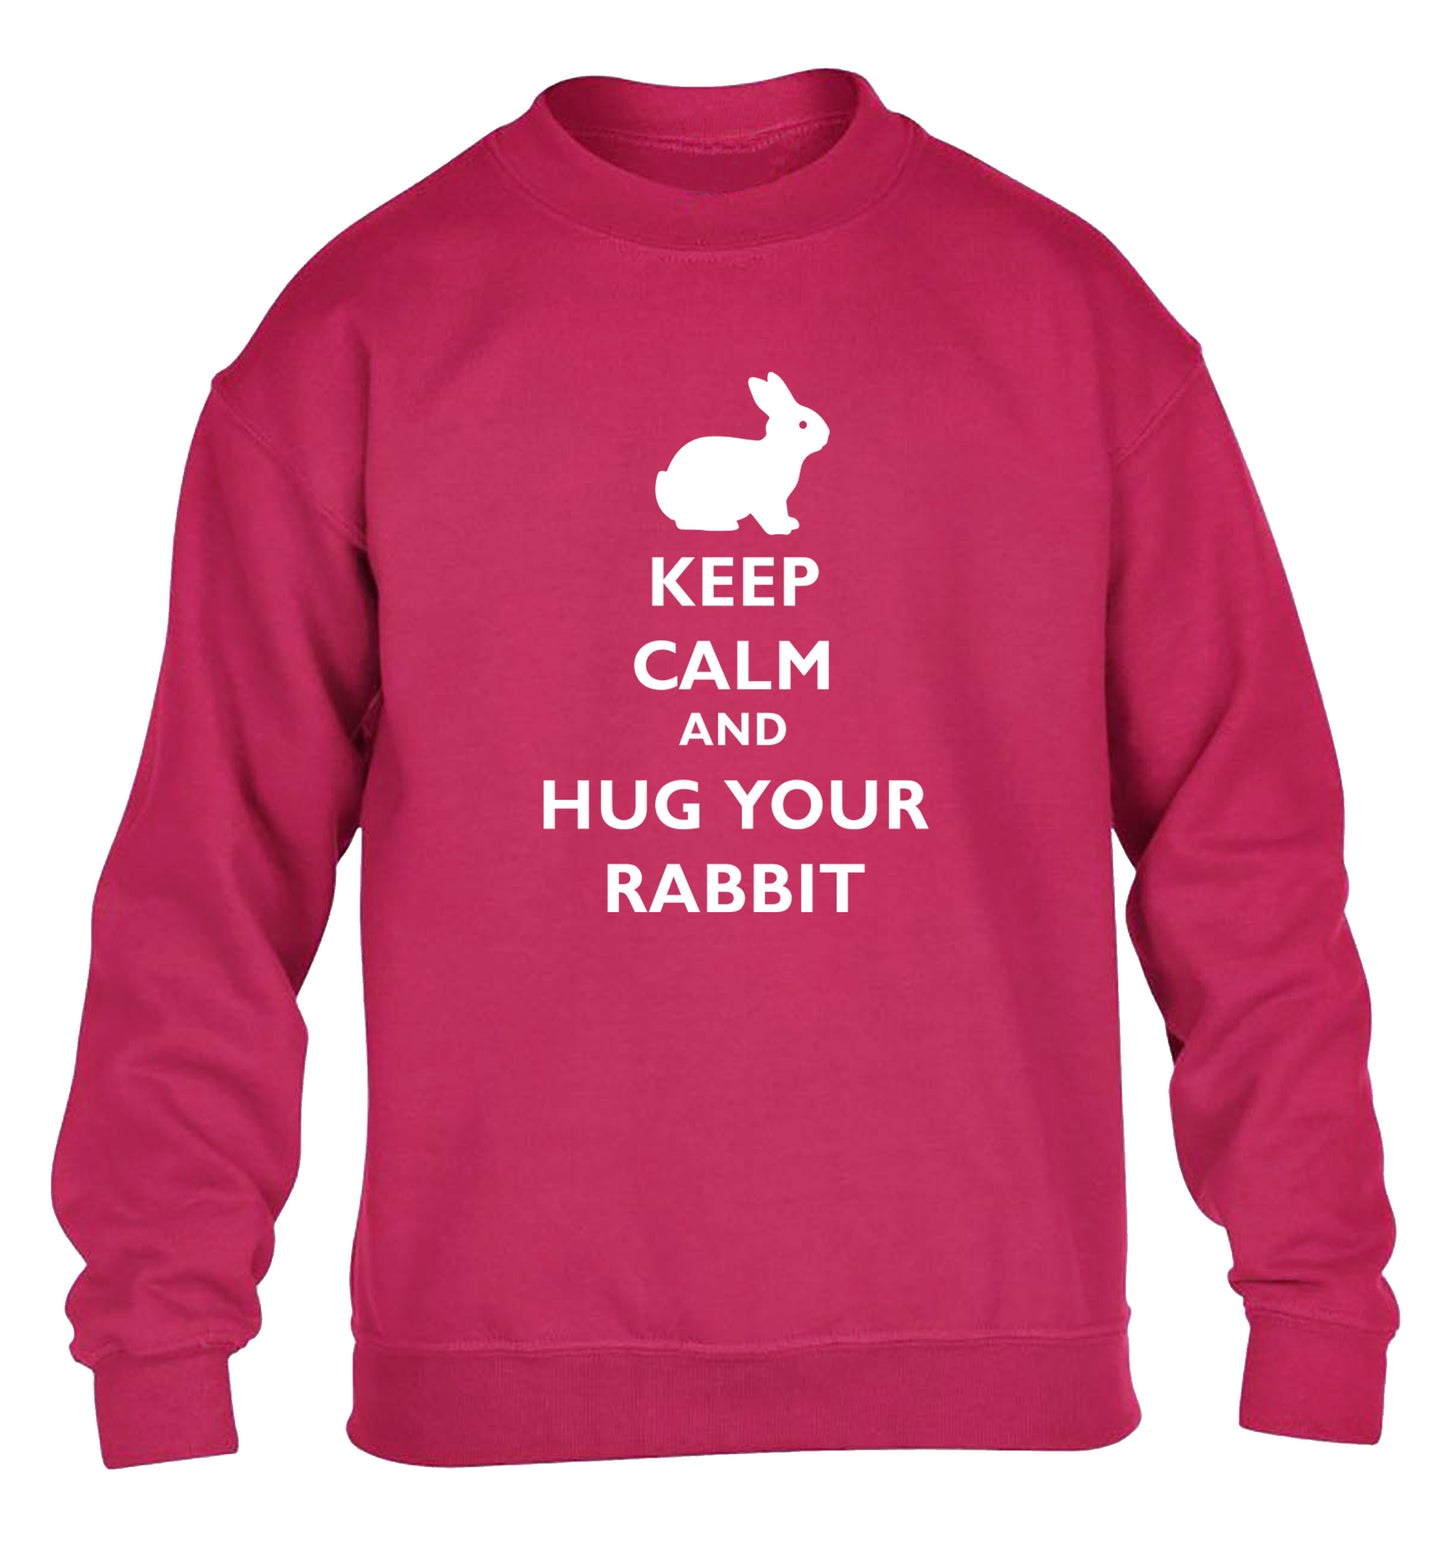 Keep calm and hug your rabbit children's pink sweater 12-13 Years